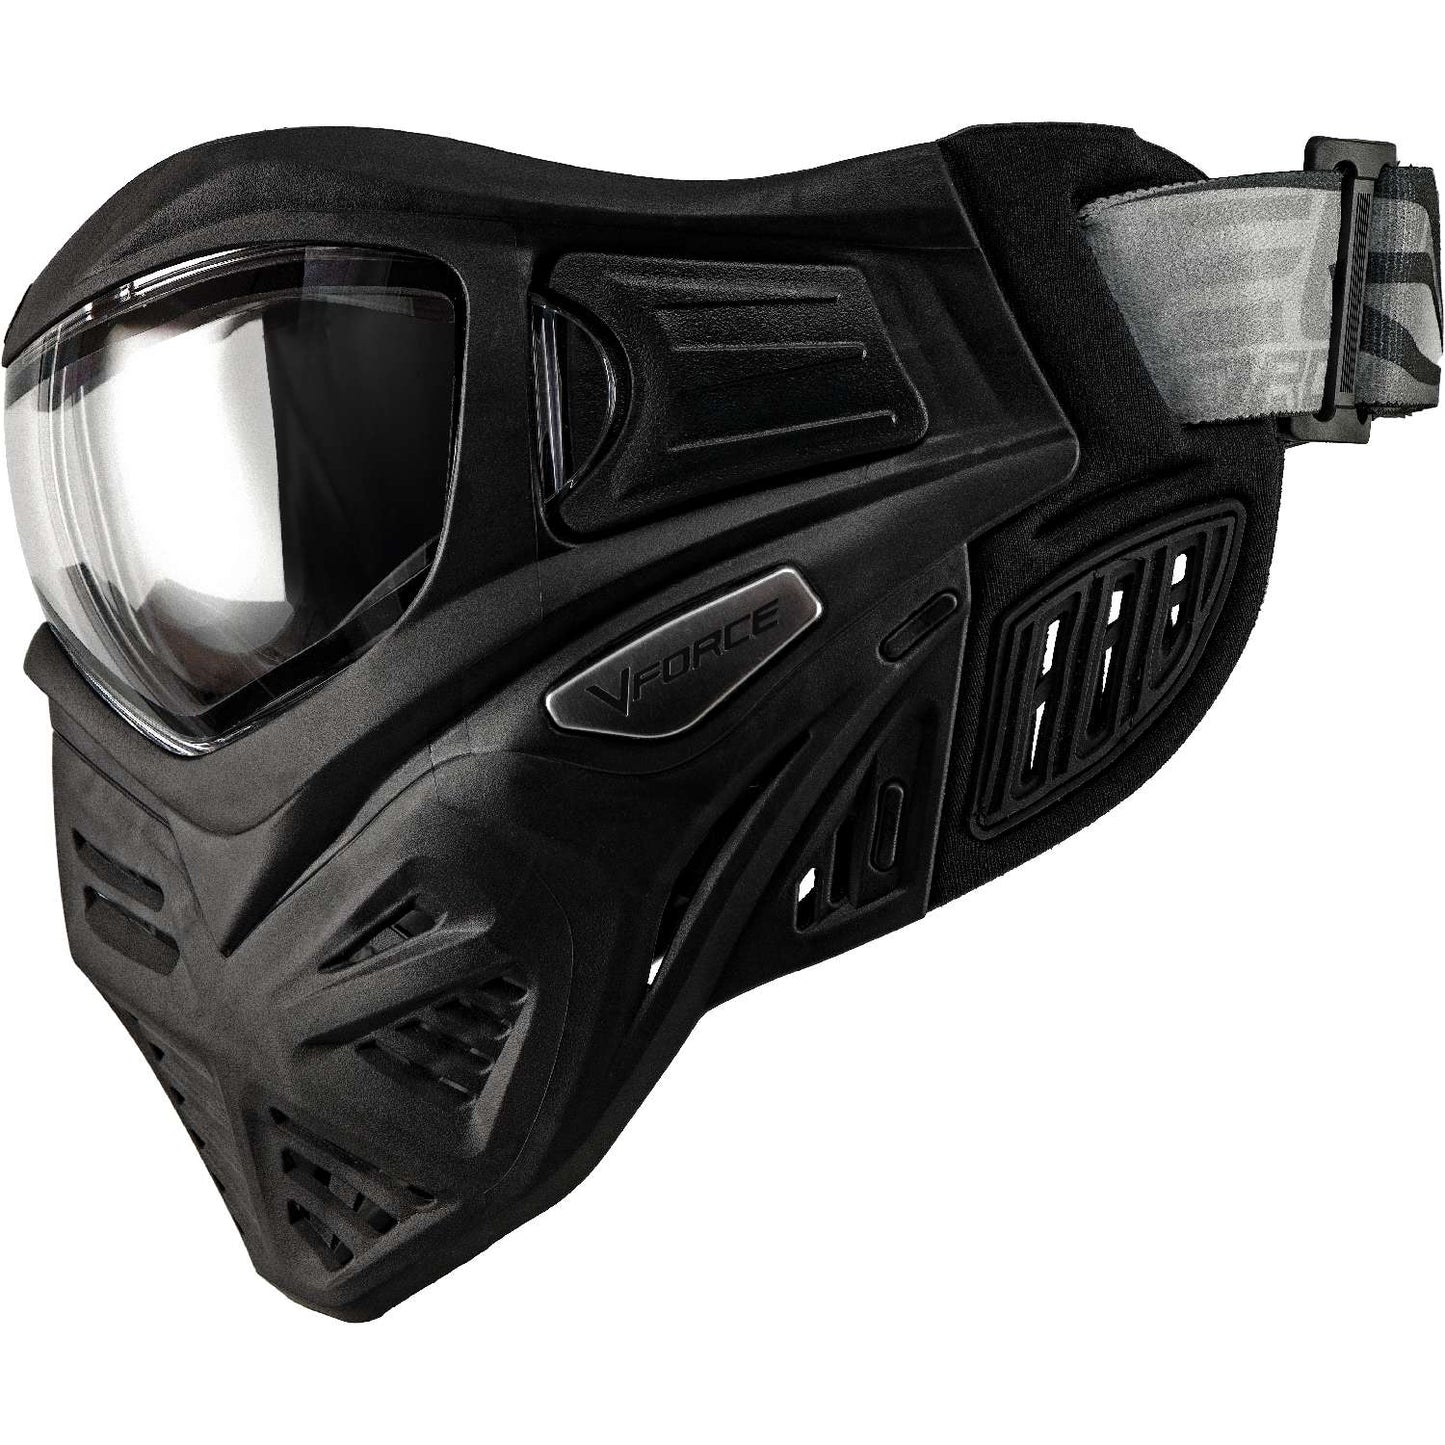 V-Force Grill 2.0 Paintball Goggle - Thermal Clear Lens - Black/Black